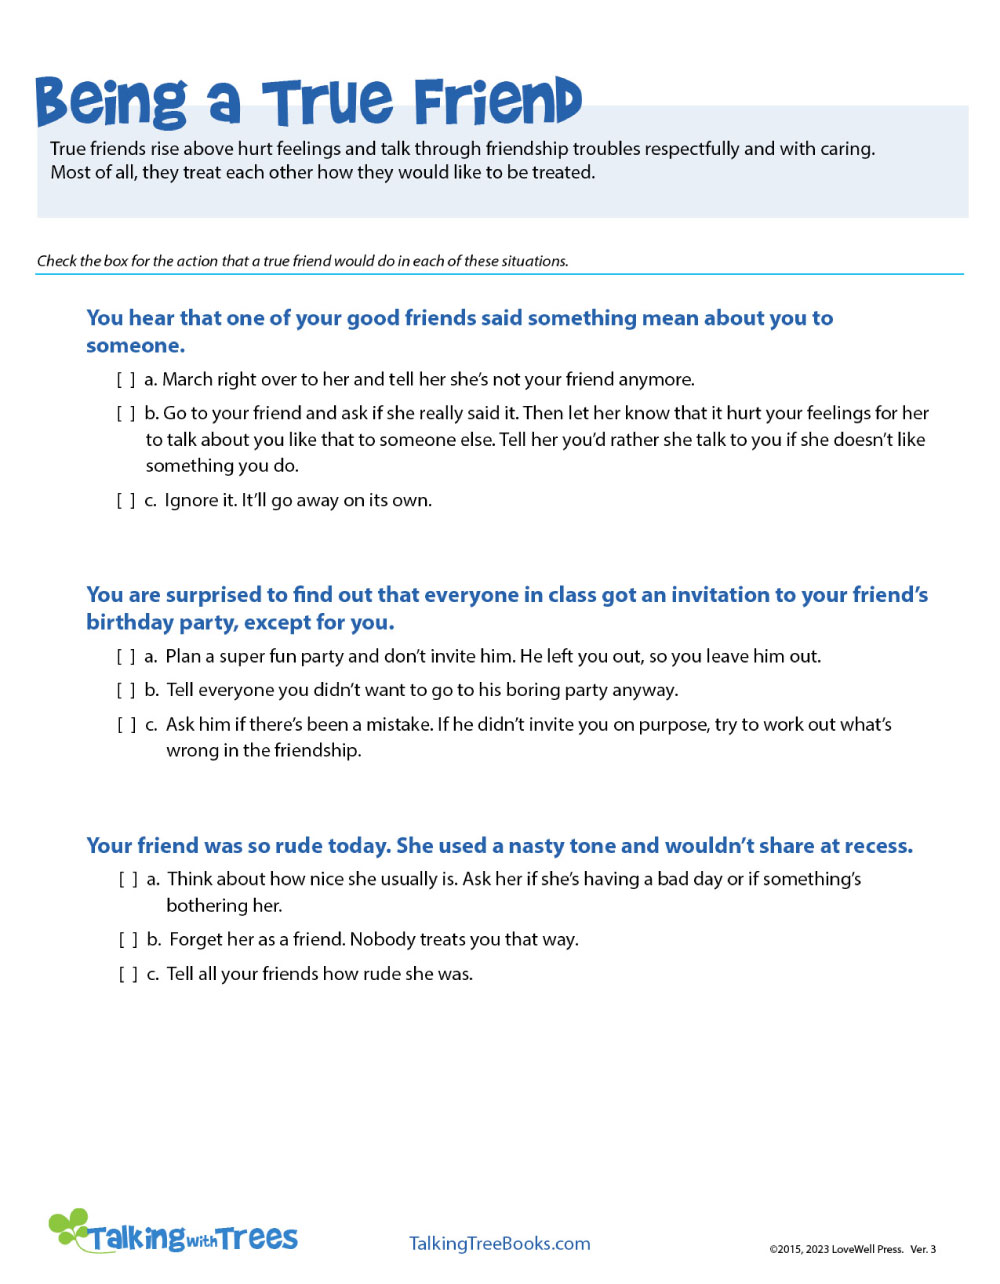 Treating others with Respect- Character Education Worksheet